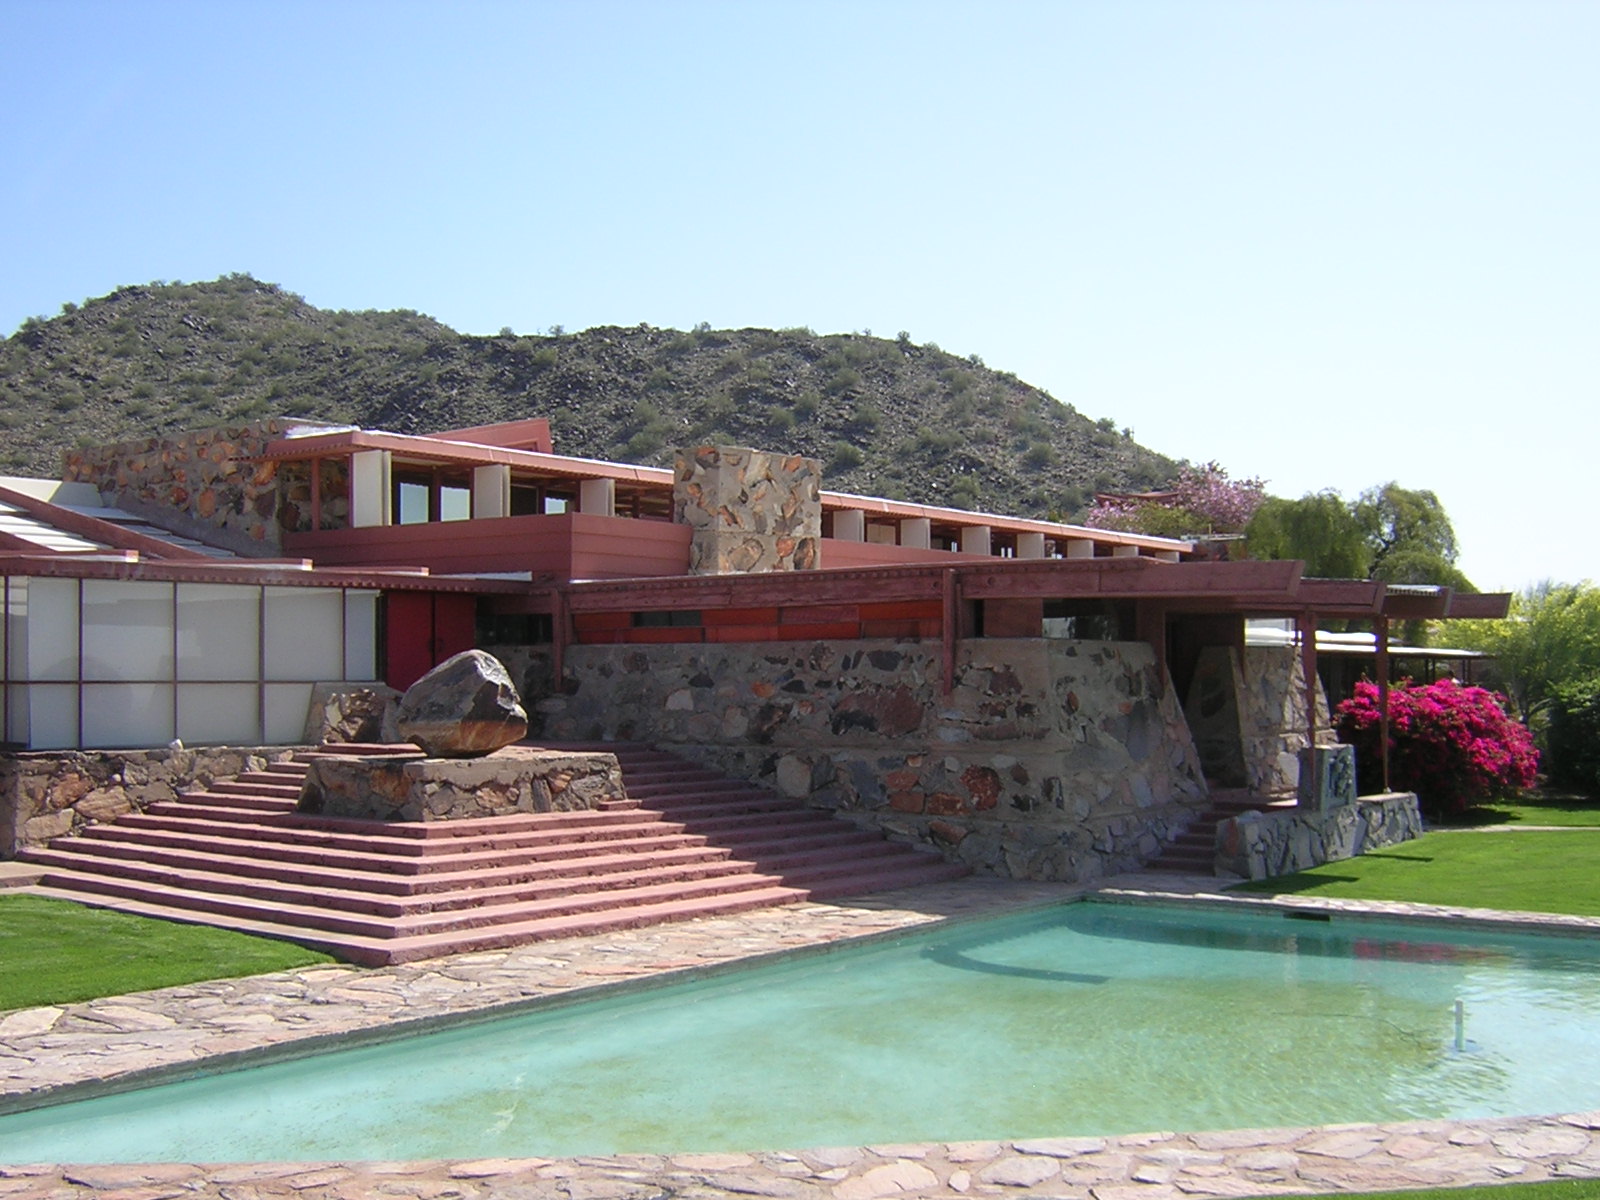 A stone house with decks and red beams with a pool at the bottom of the steps